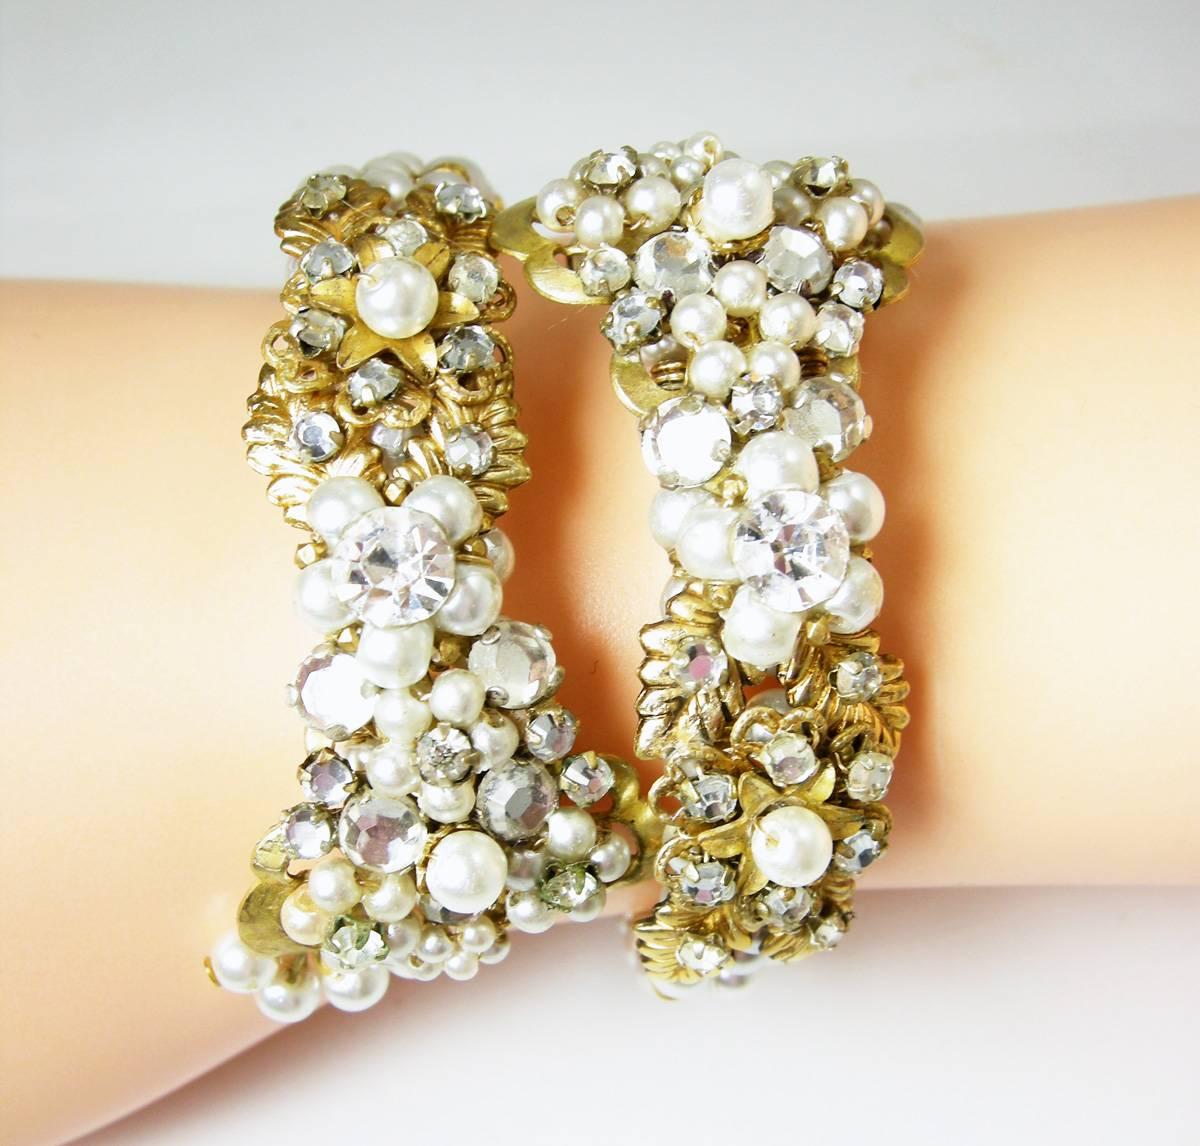 This authentic all original vintage Miriam Haskell flexible spring clamper features faux pearls with clear rhinestone accents, gold-tone leaves and setting. The bracelet is 1/2” wide and will fit a size 5-7 wrist. It’s in excellent condition.